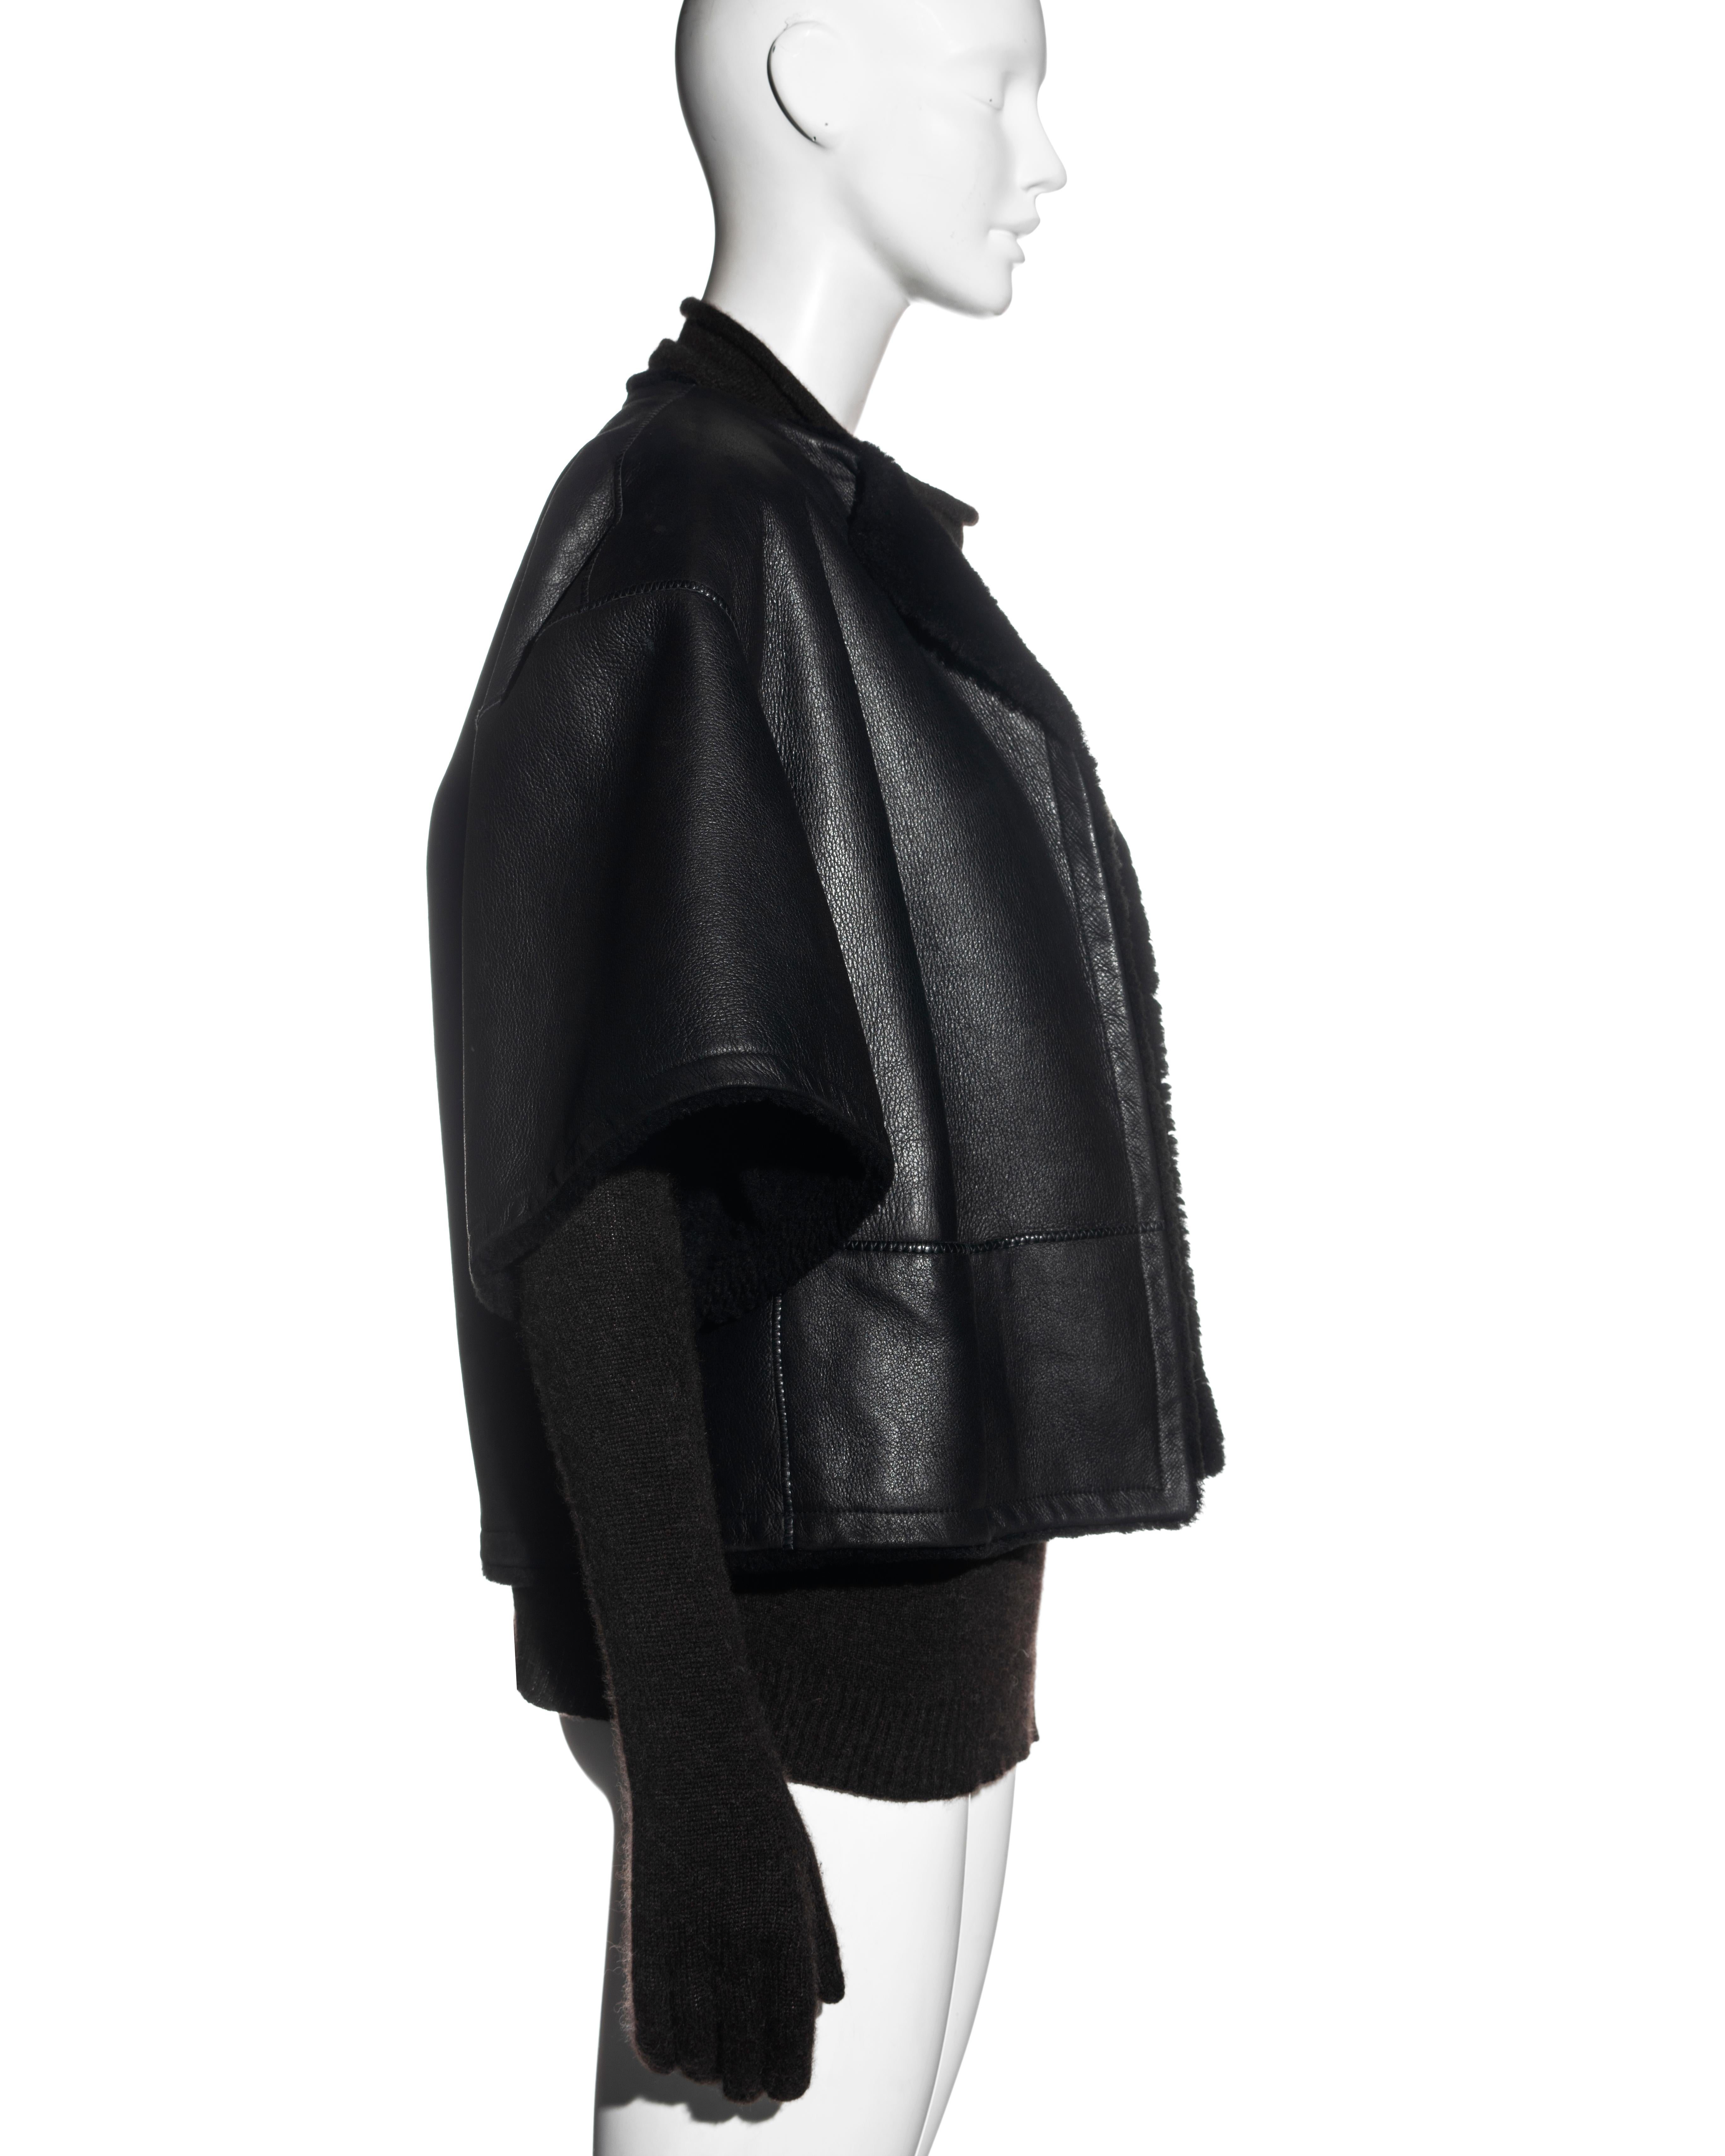 Women's Hermes by Martin Margiela shearling jacket and cashmere sweater set, fw 2002